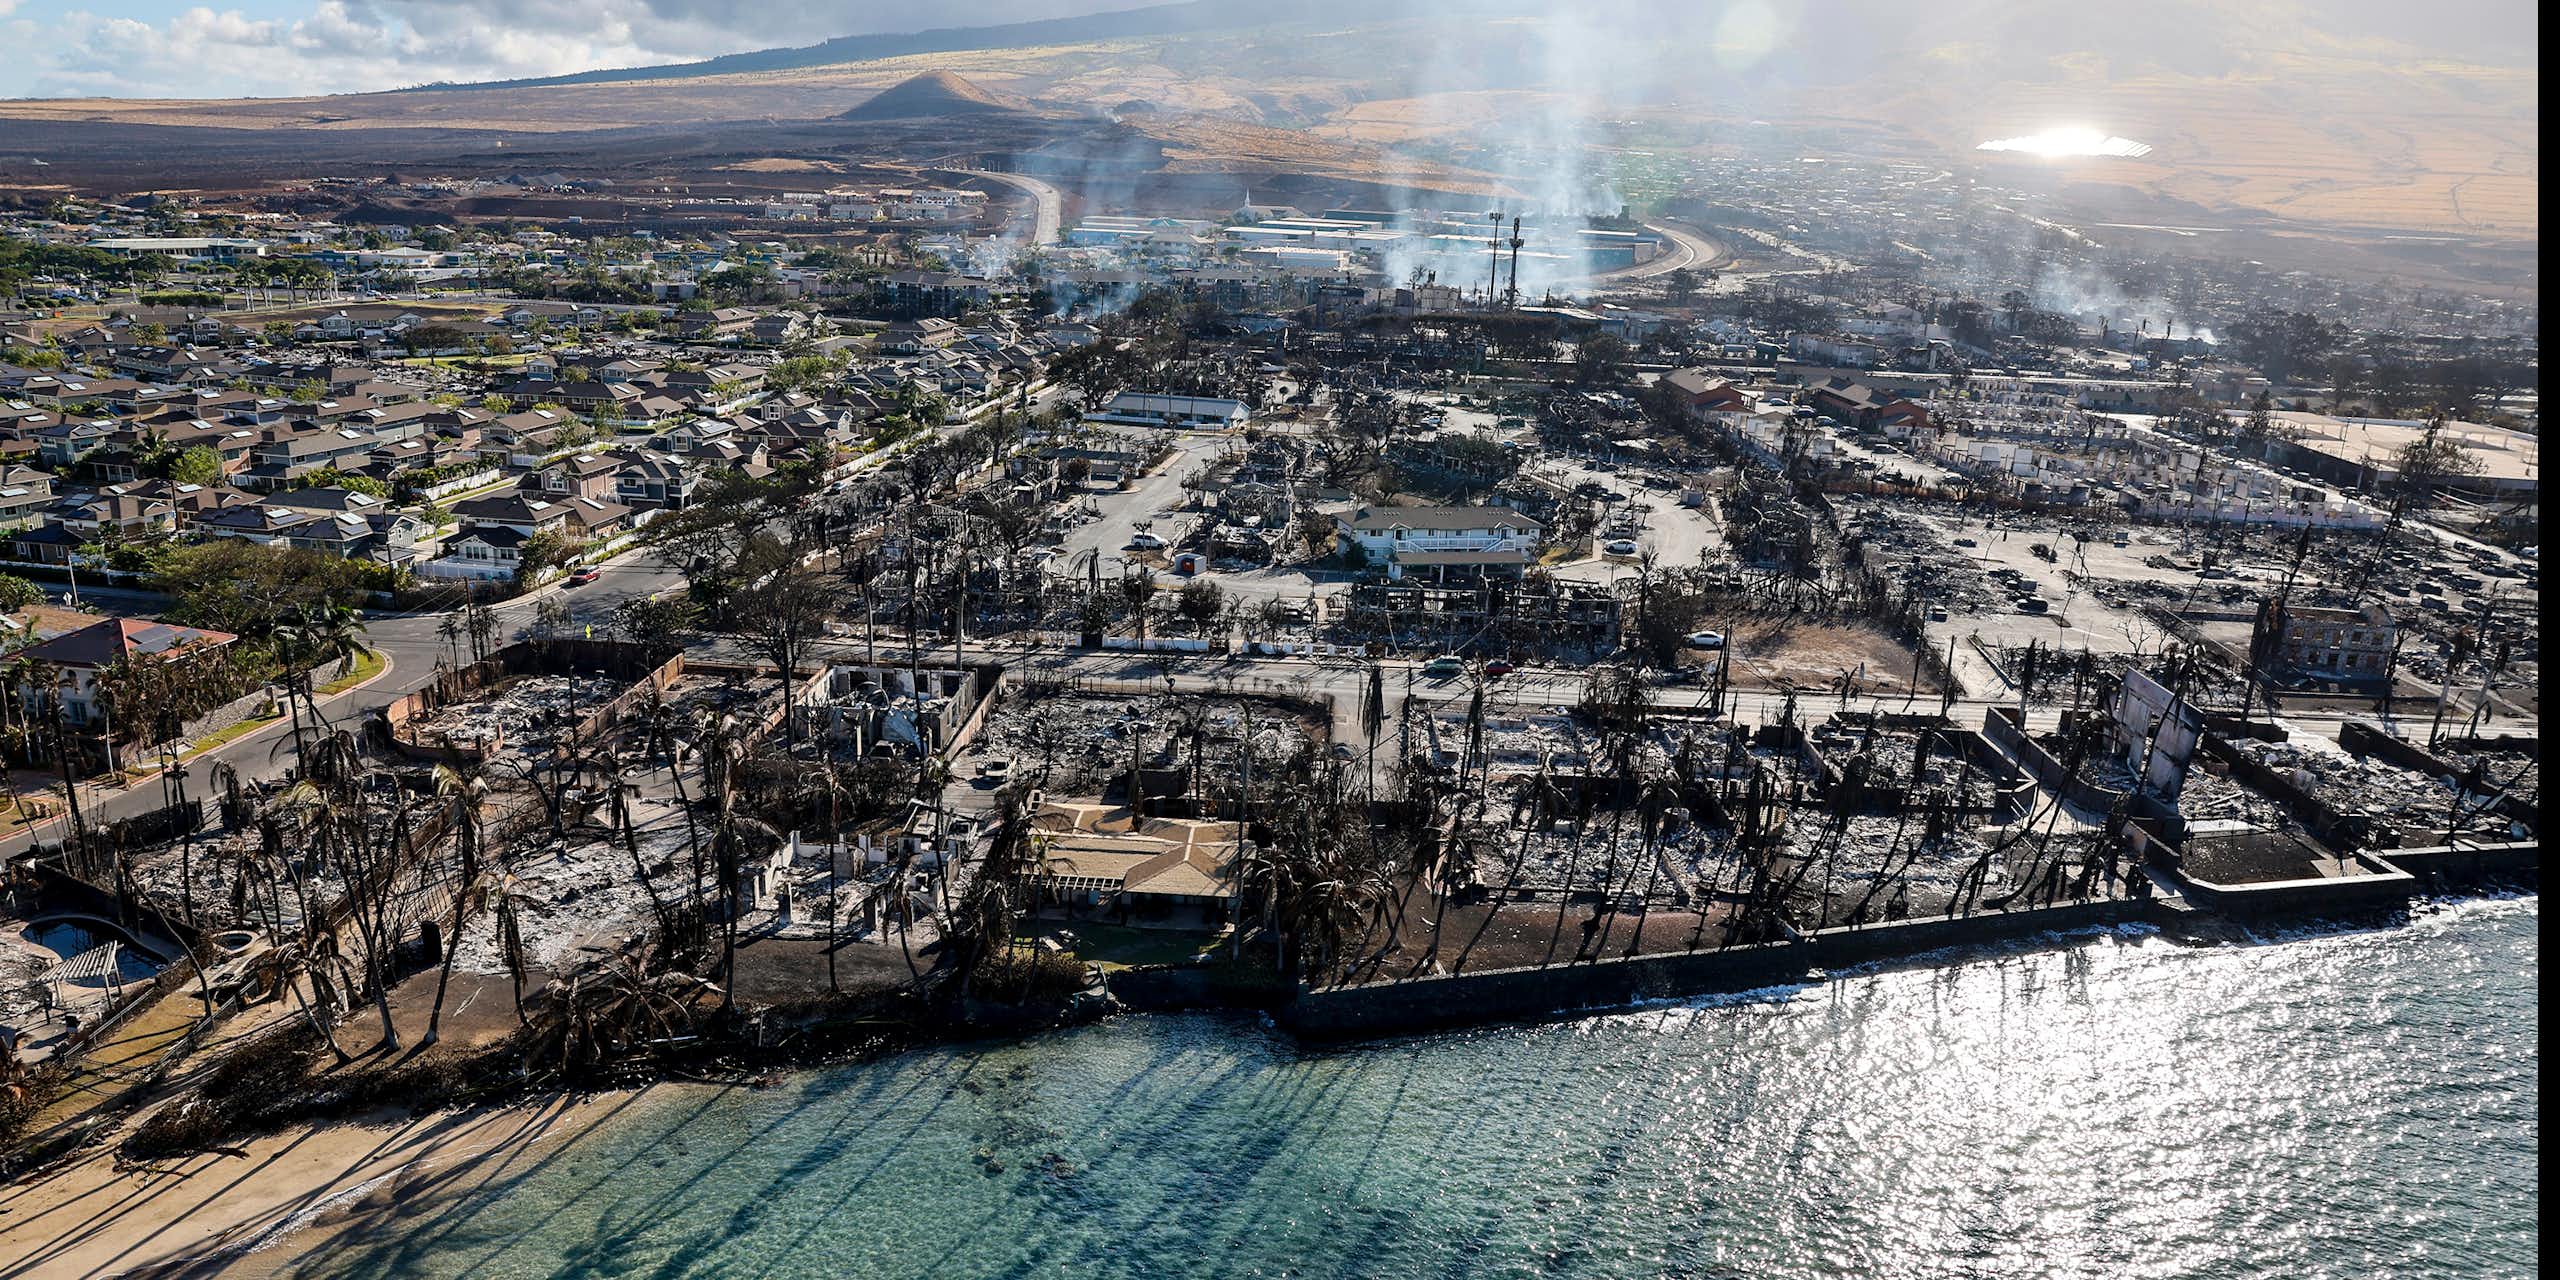 An aerial view from over the water toward town with burned buildings across the entire landscape and smoke rising beyond.